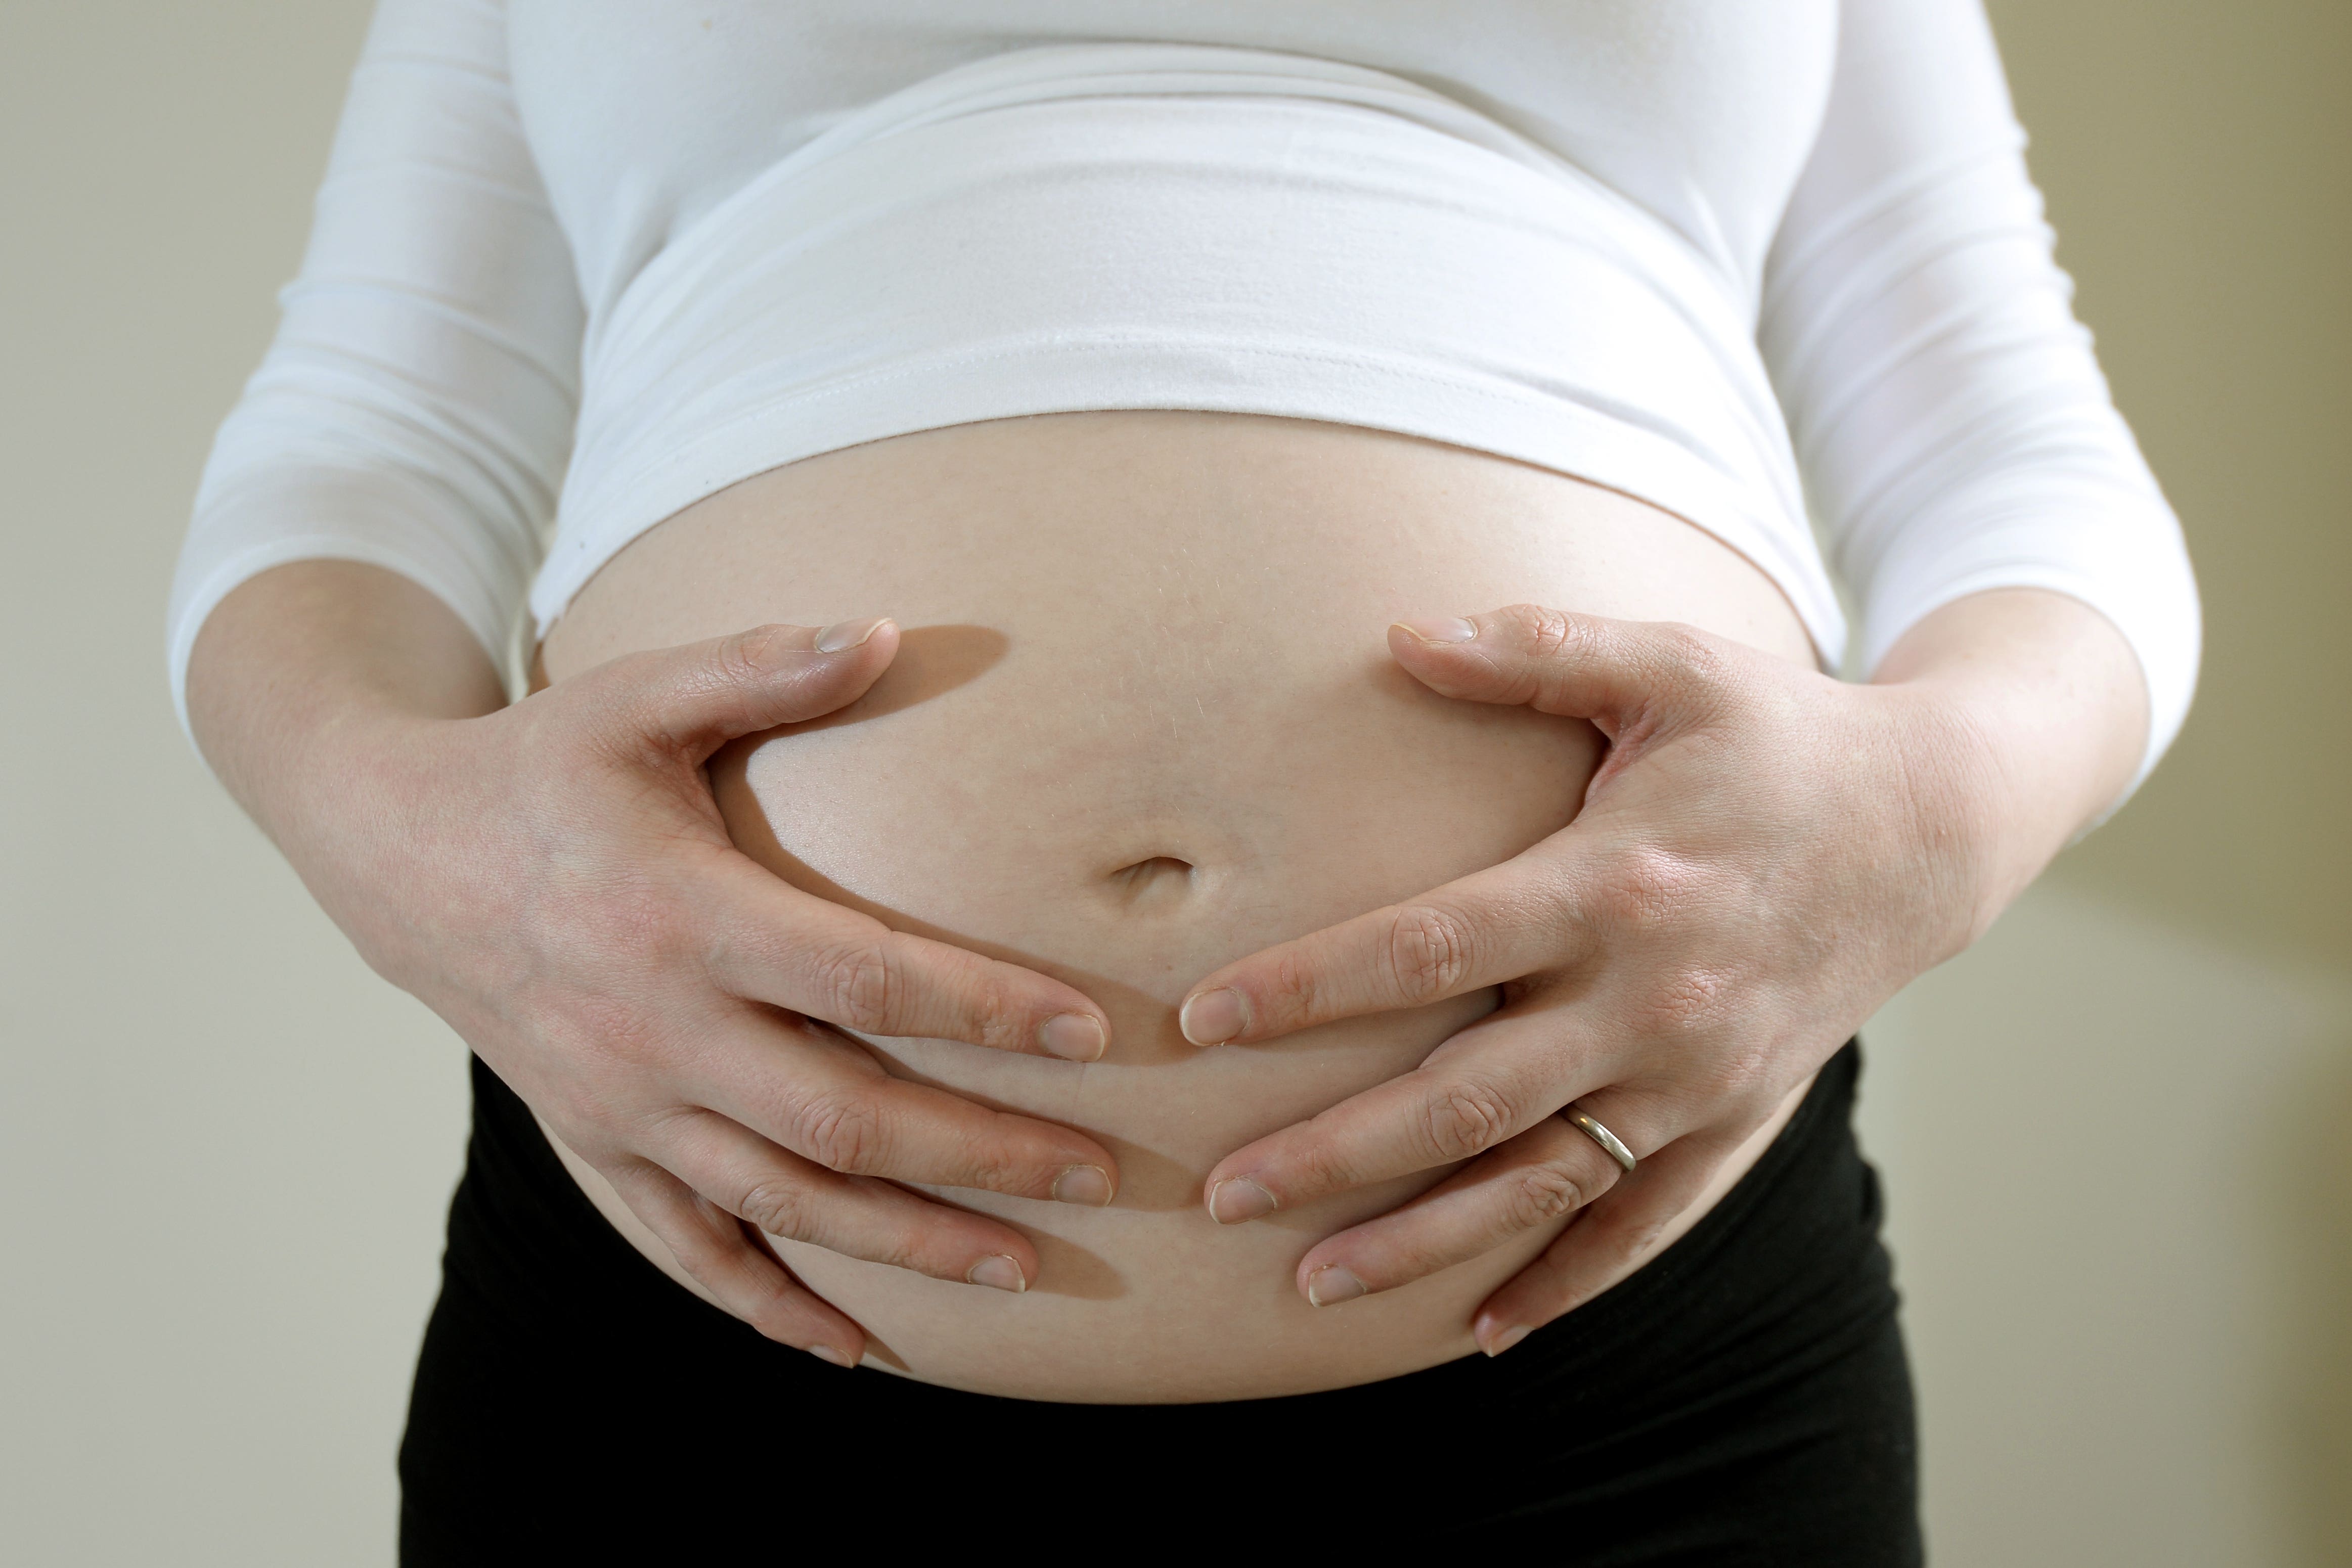 Pre-eclampsia usually develops in the second half of pregnancy and can lead to serious complications.